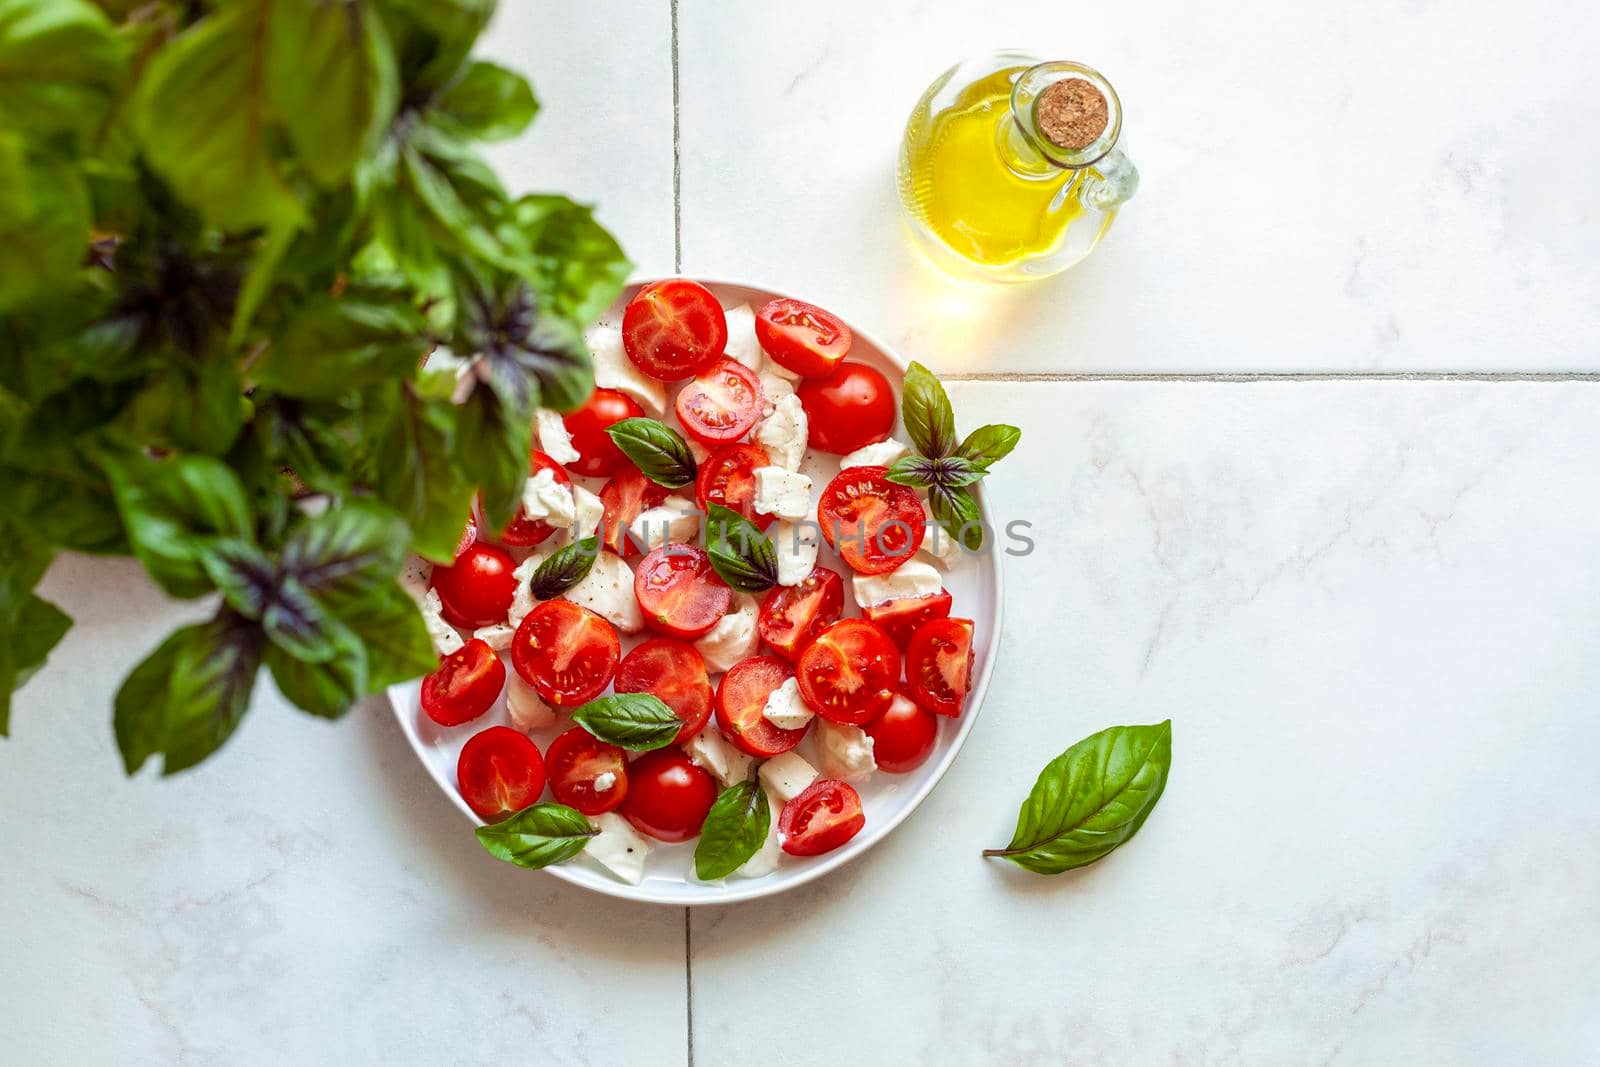 portion of caprese salad under basil plant, concept of home gardening, top view, copy space